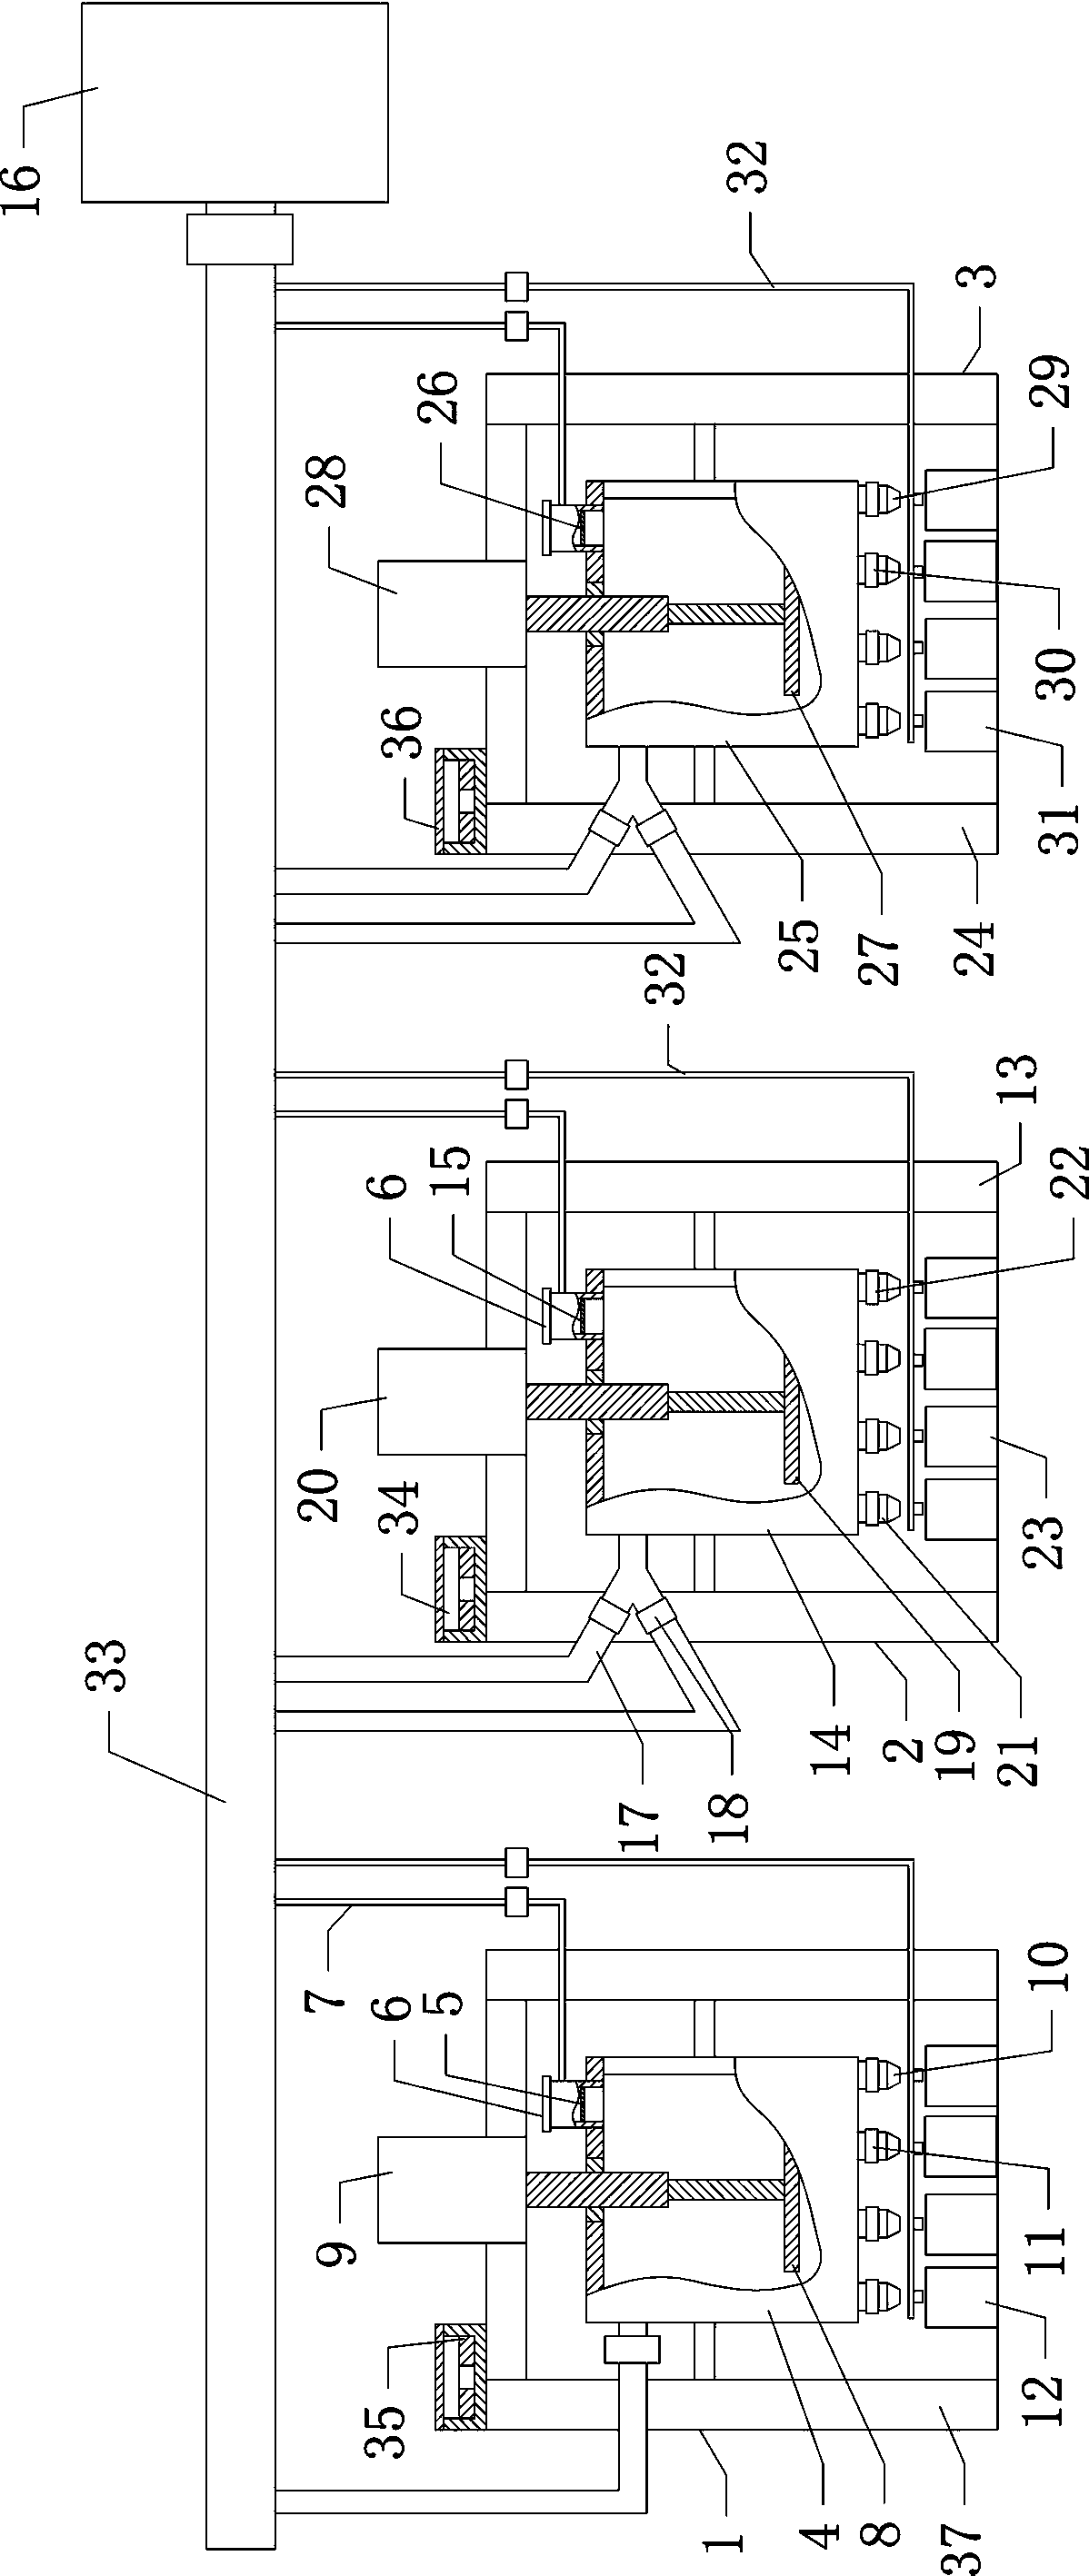 Chlortetracycline hydrochloride bacterial endotoxin inspection equipment and method